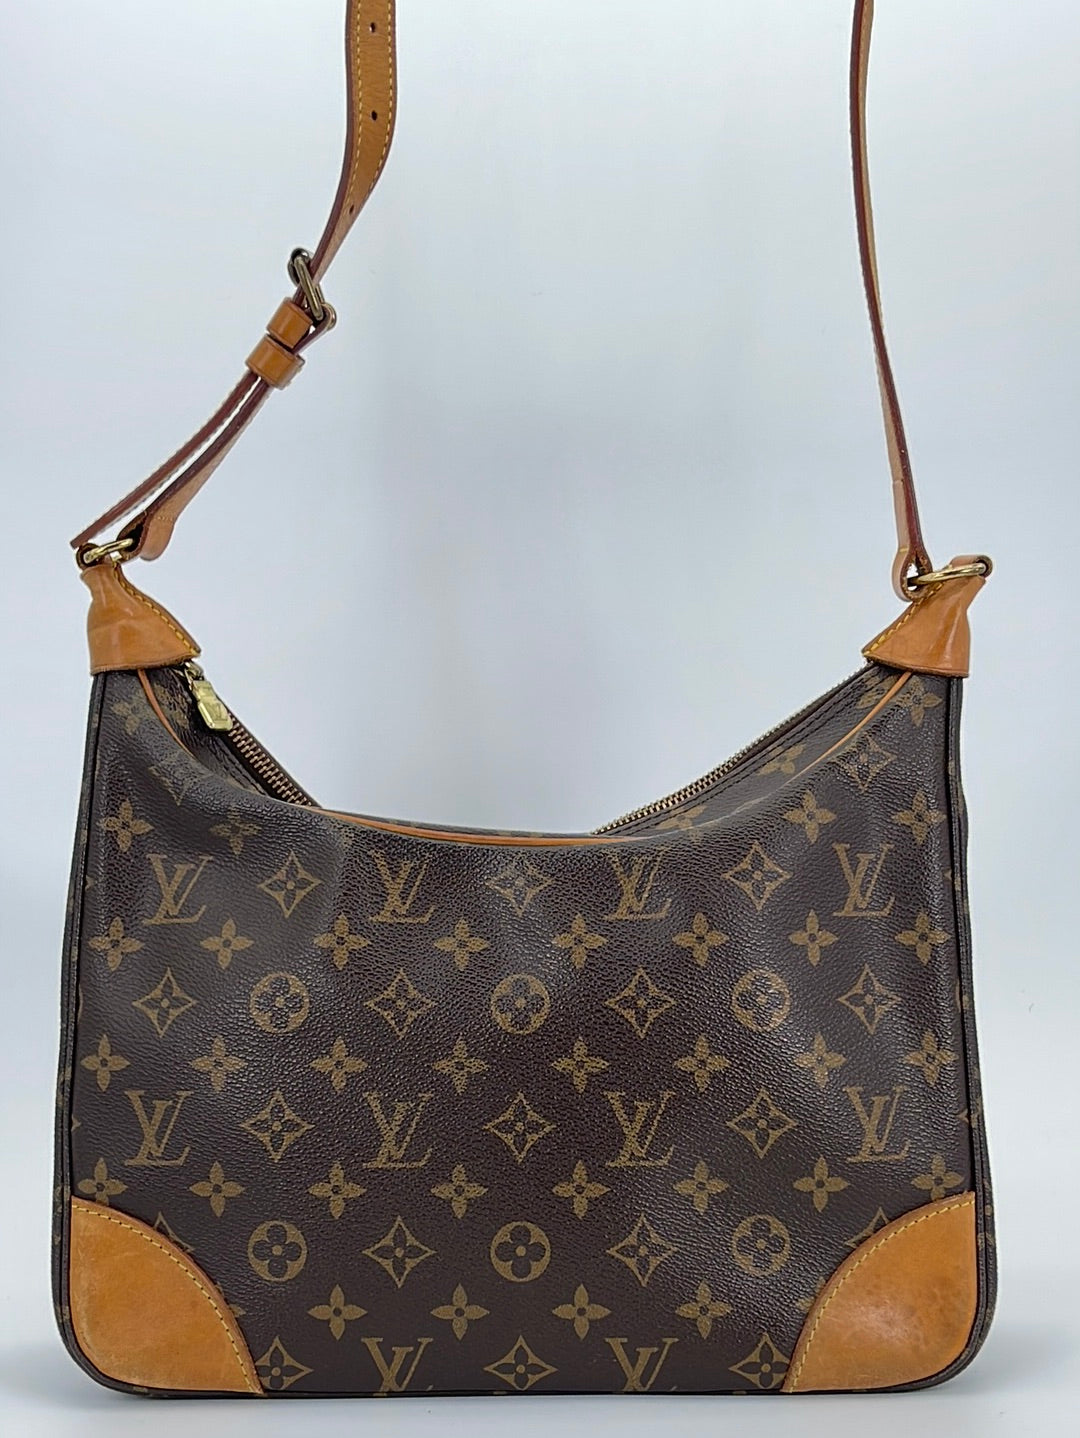 Products by Louis Vuitton: Boulogne Bag